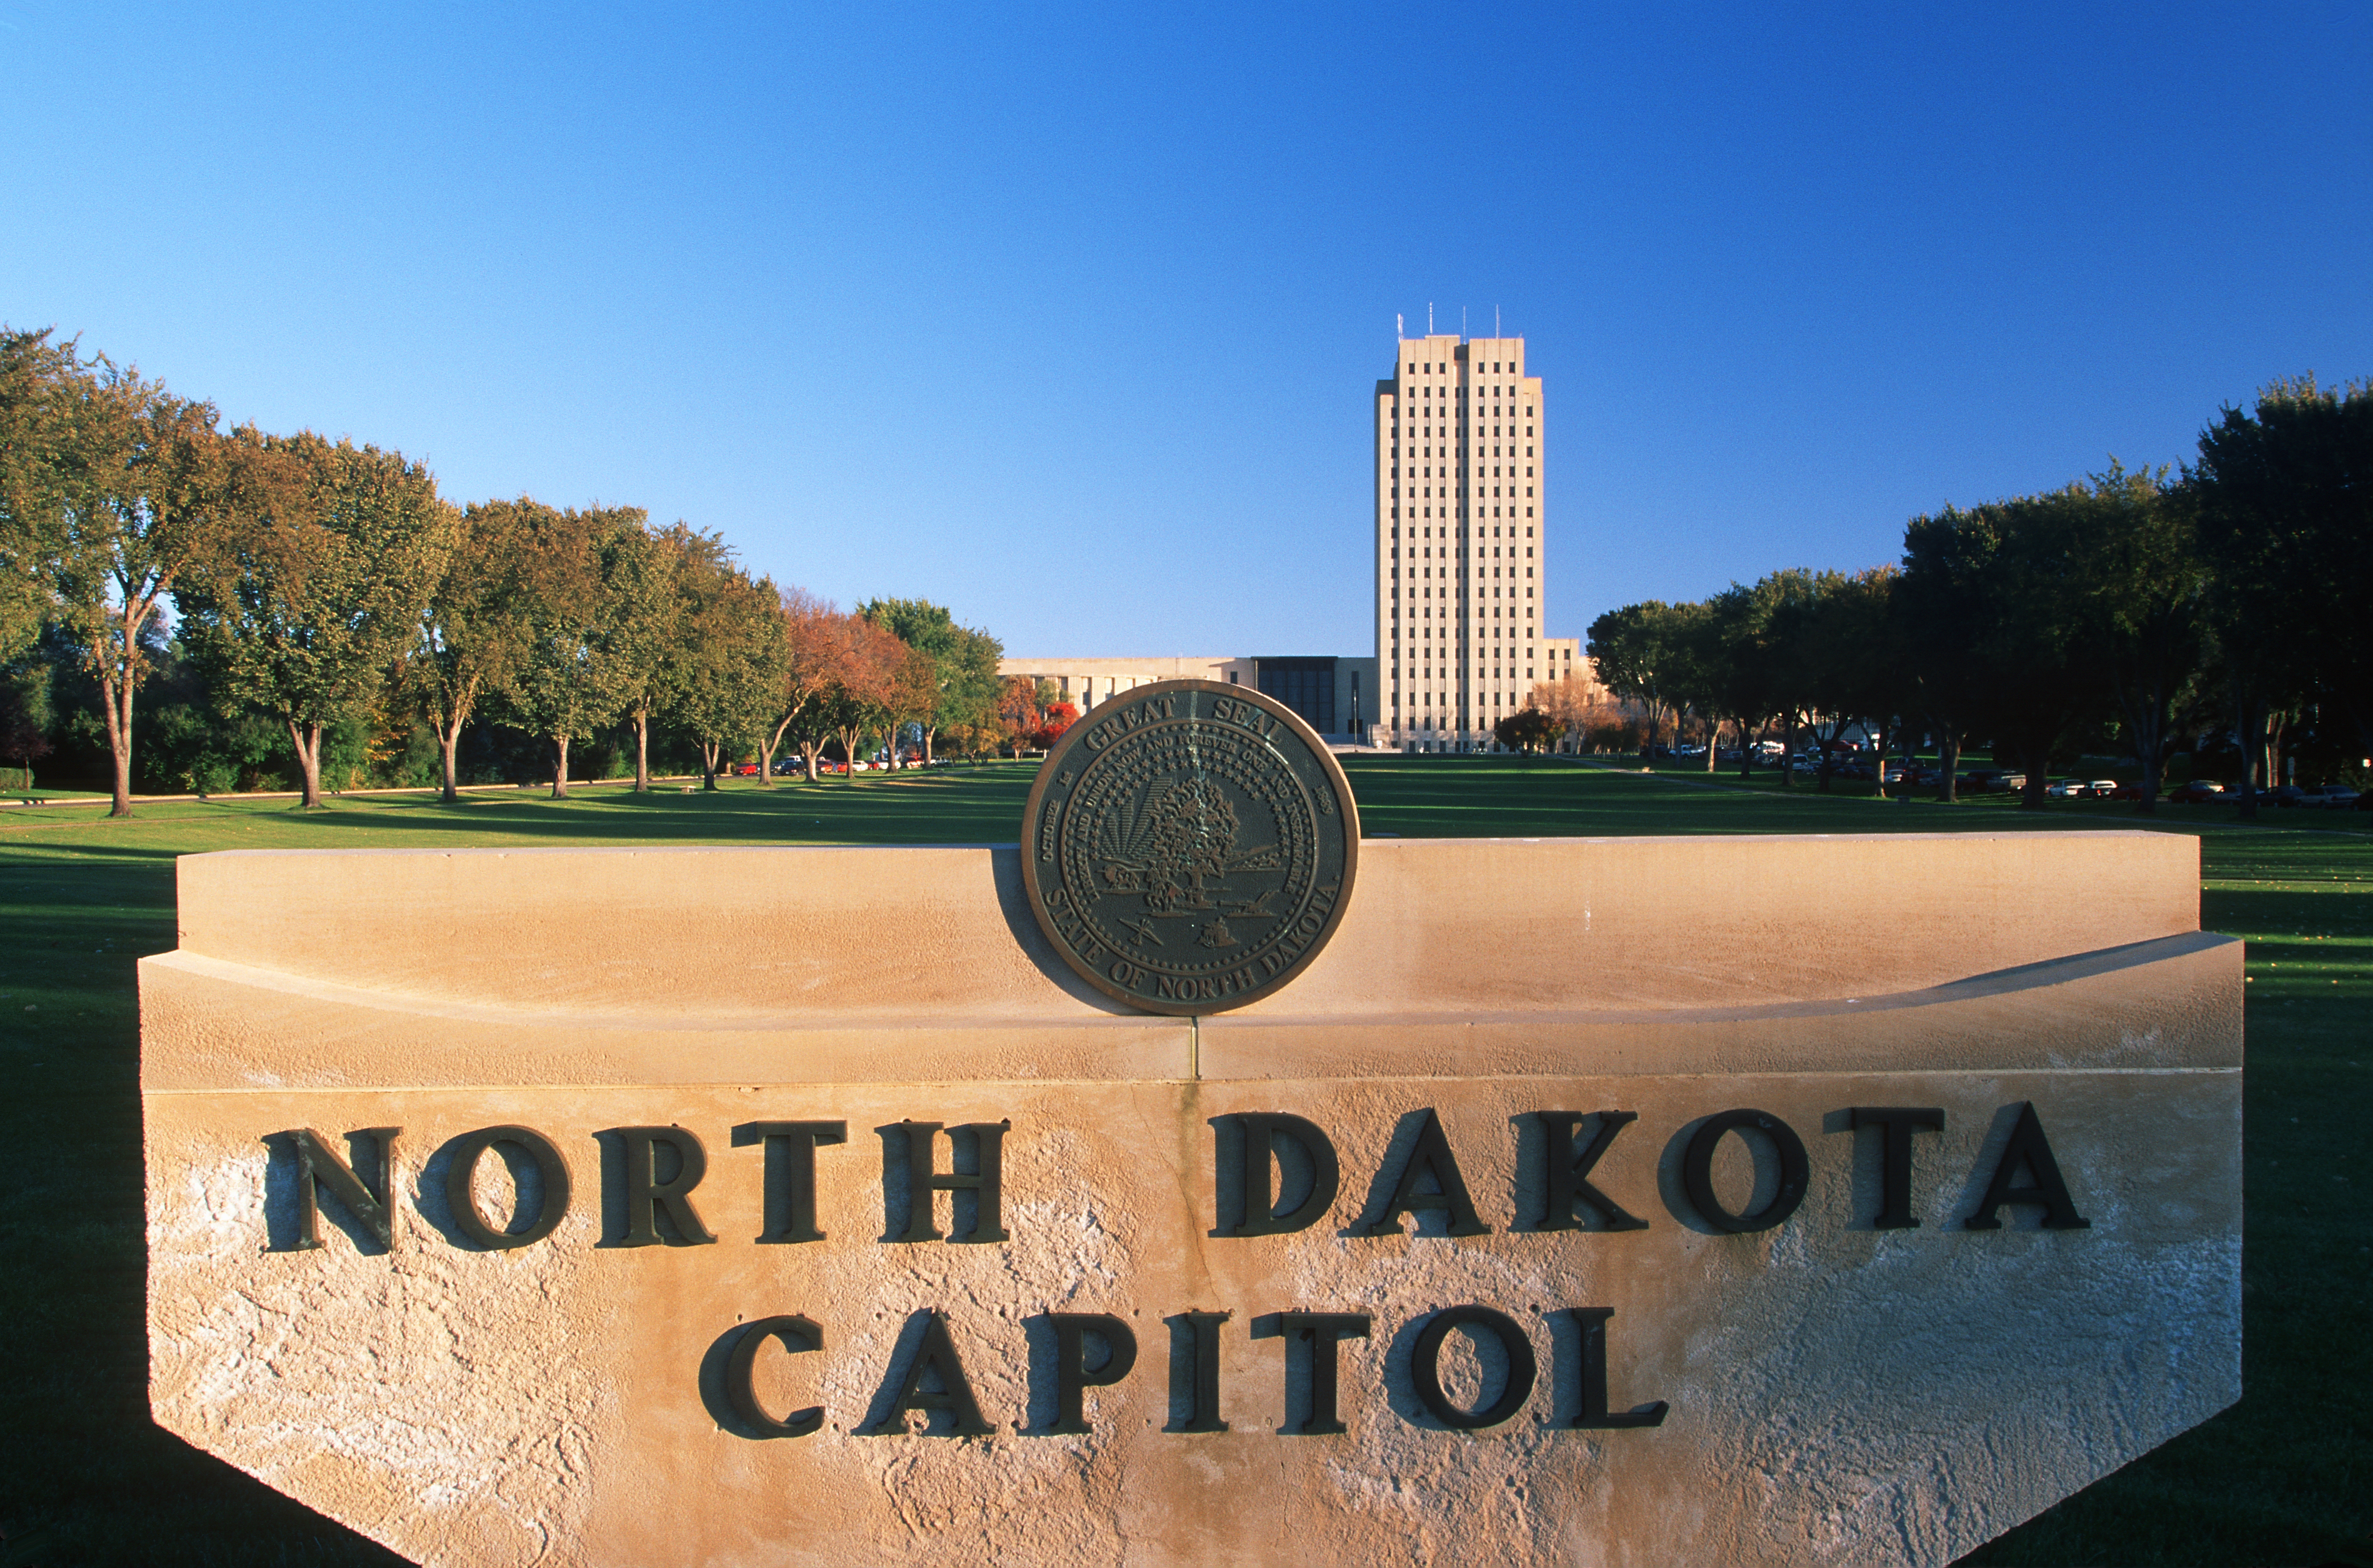 Sign of North Dakota capitol with the Capitol building in the background